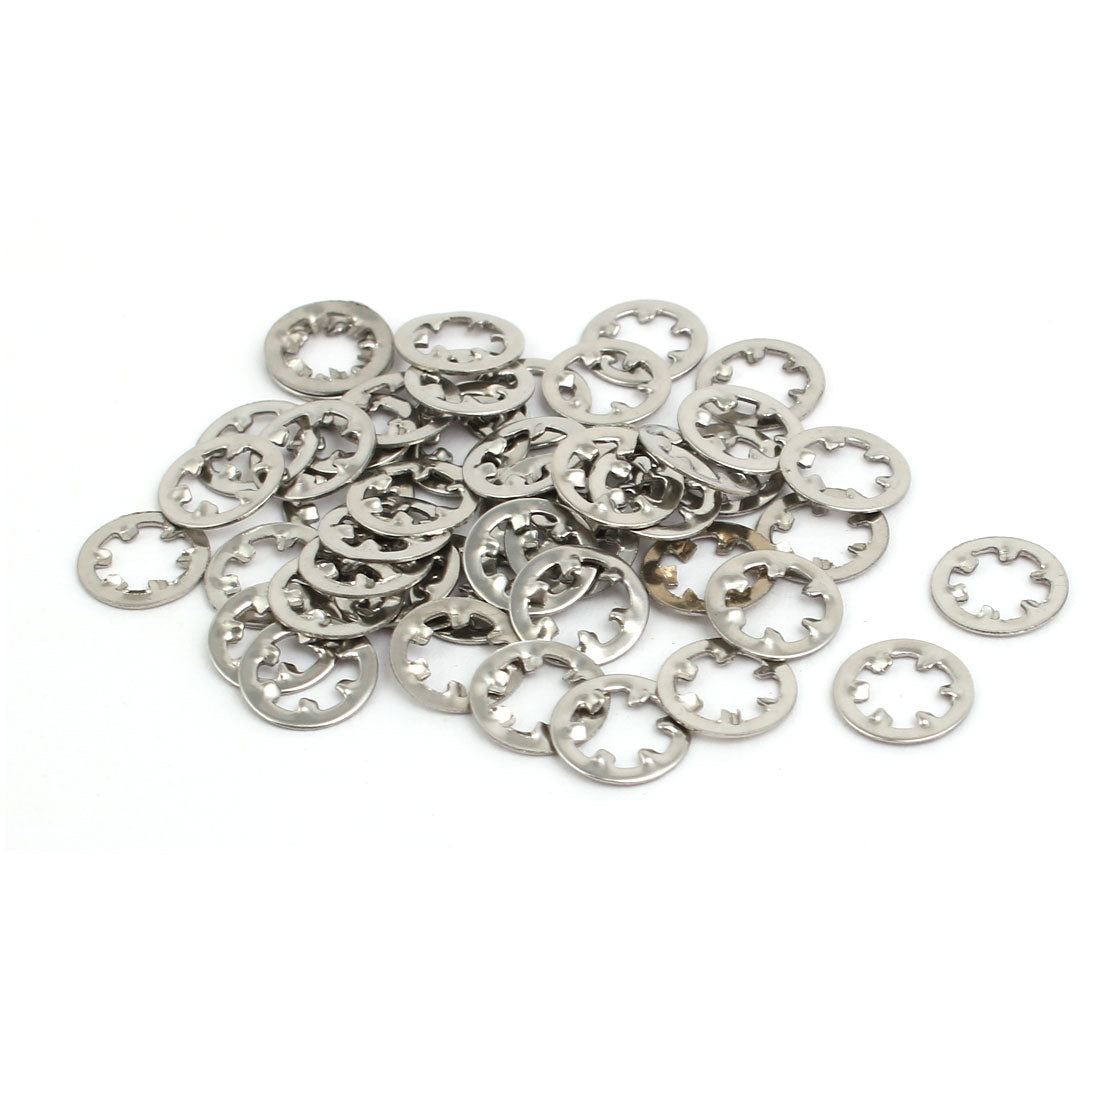 uxcell Uxcell 4mm Inner Dia Stainless Steel Internal Tooth Lock Washer Silver Tone 50pcs